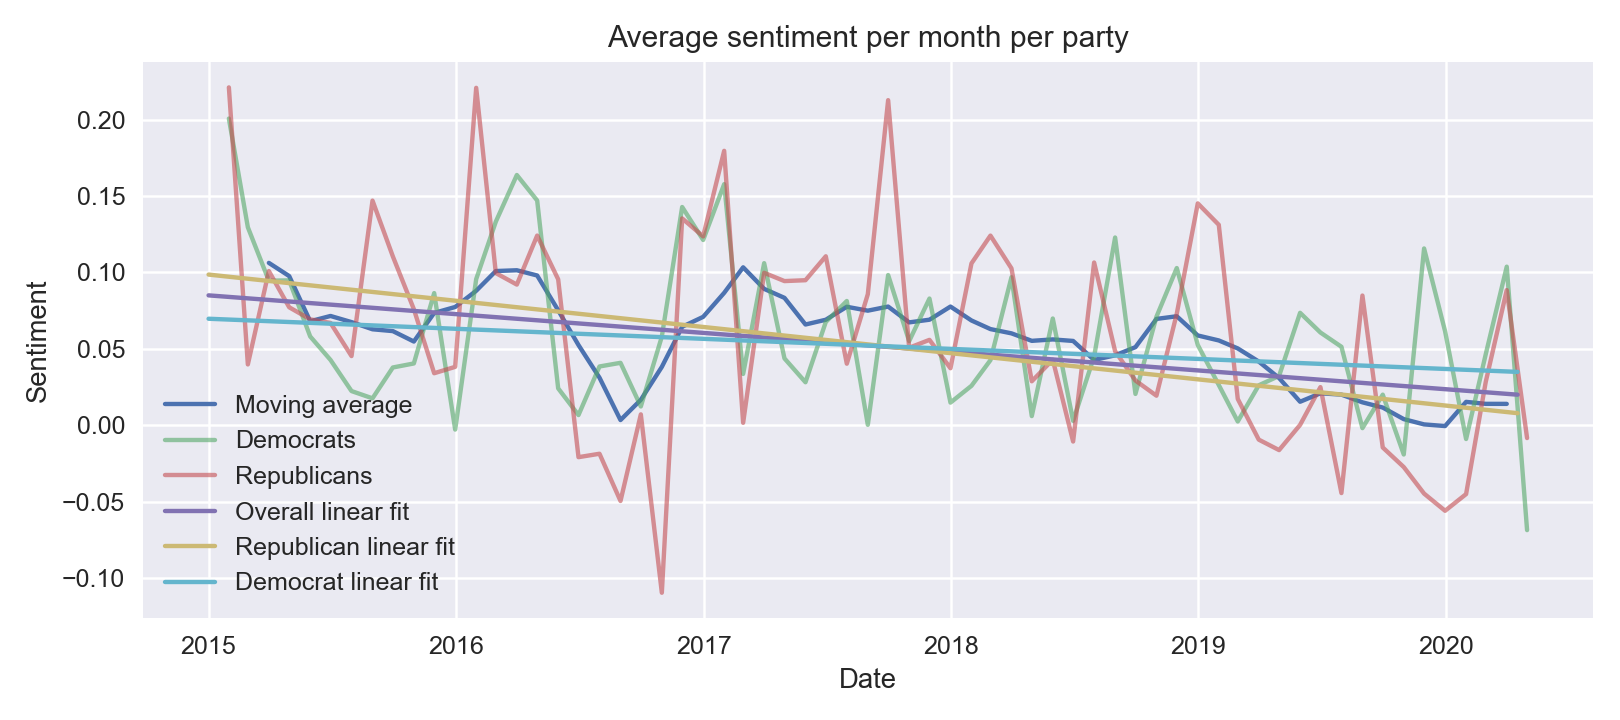 Sentiment by month and party with linear fits